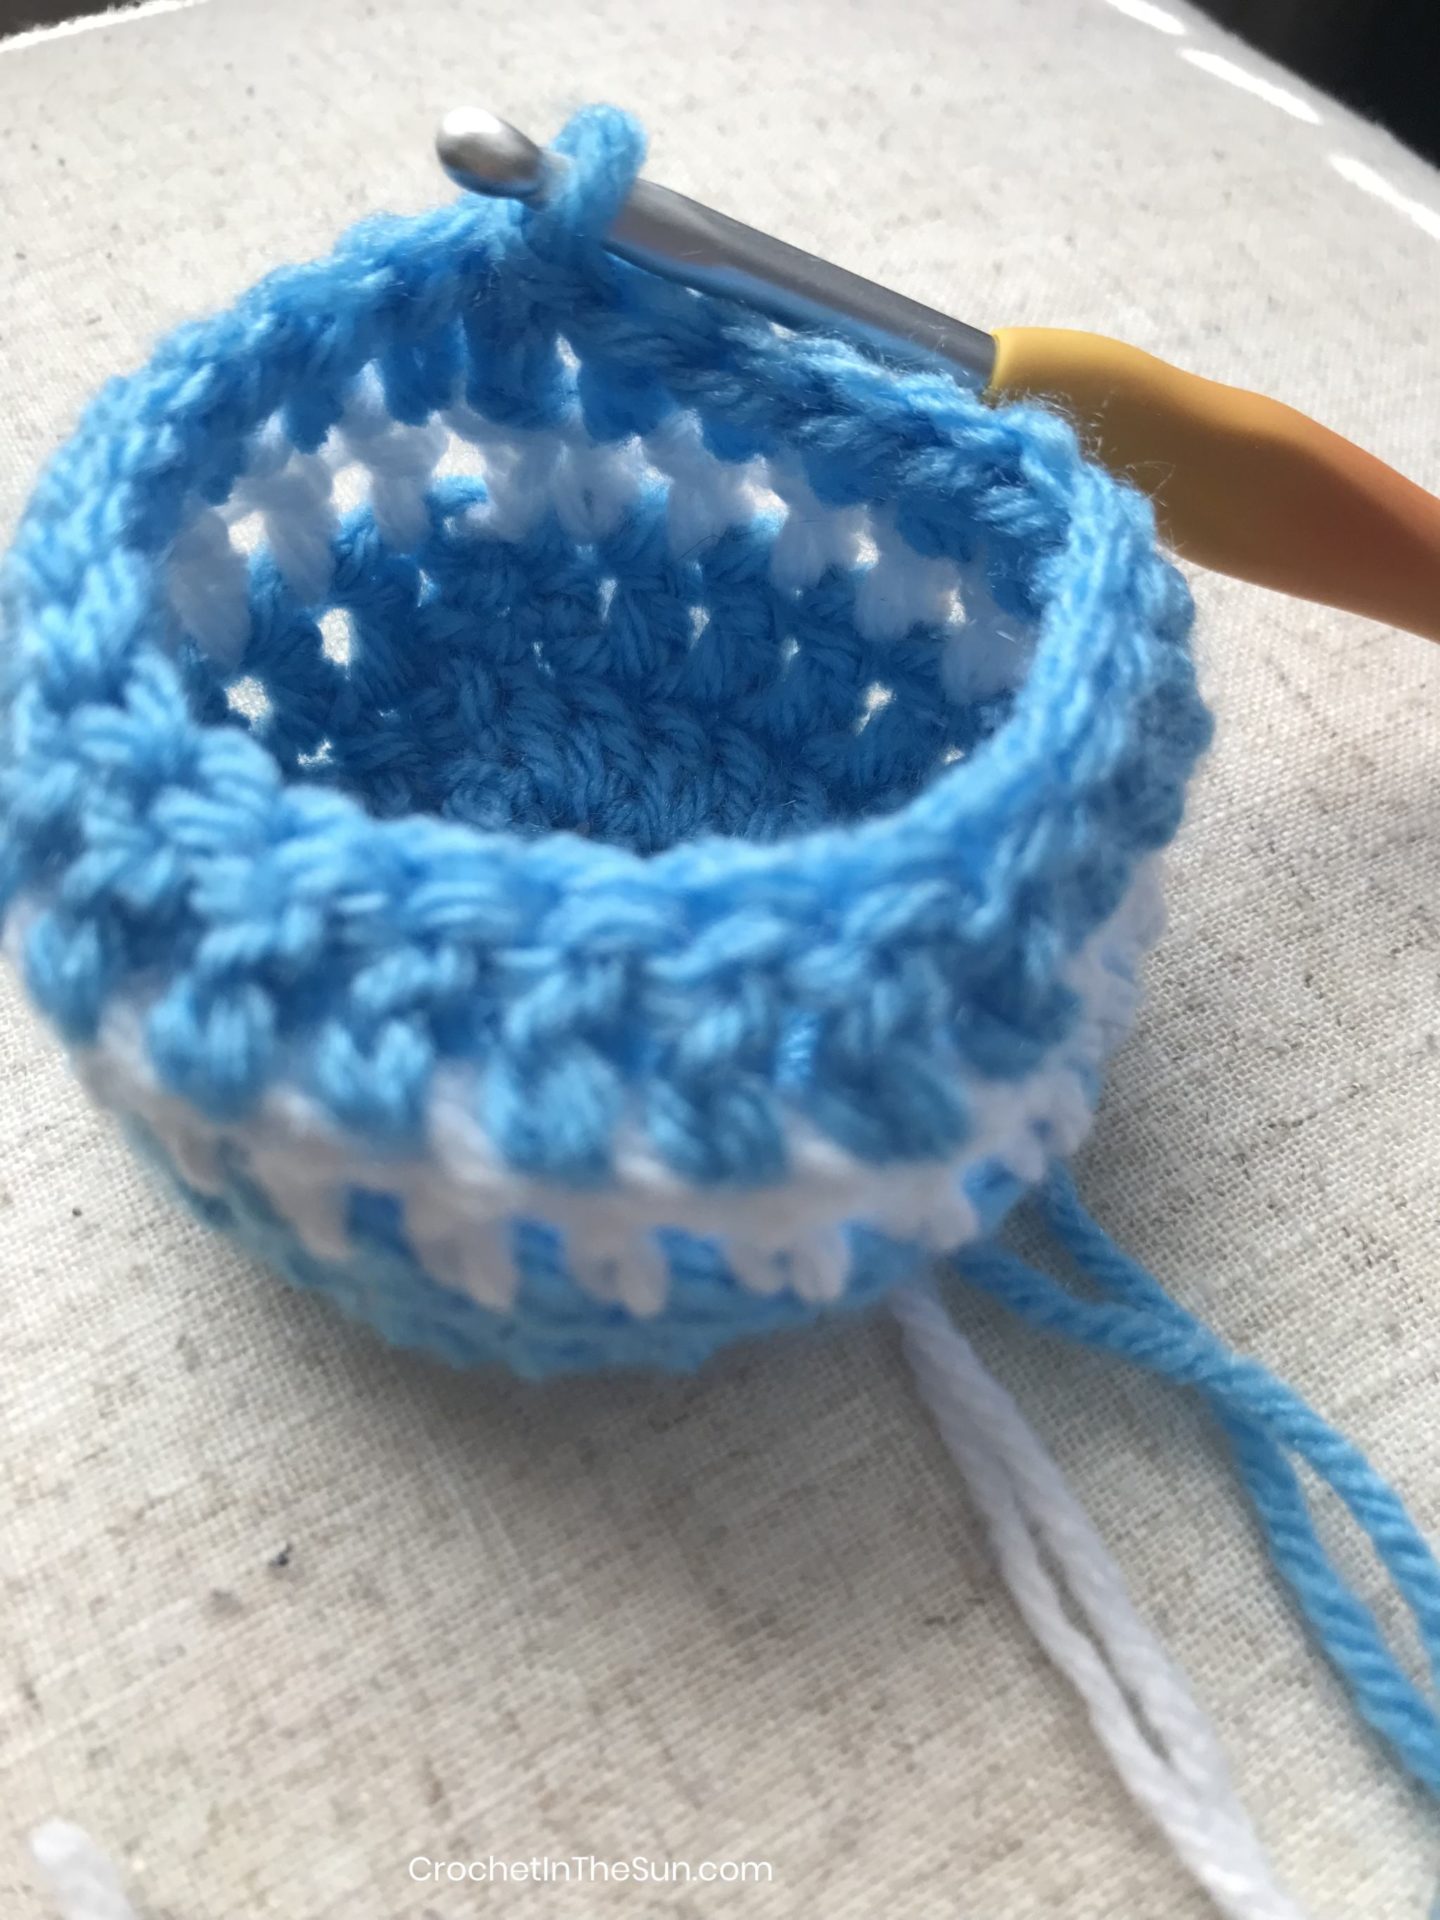 How to make the handle of the basket. (Don't fasten off) Use this yarn to start the chain for the handle. #crochet #crochetinthesun #howtocrochet #crochettutorial #crochetforbeginners